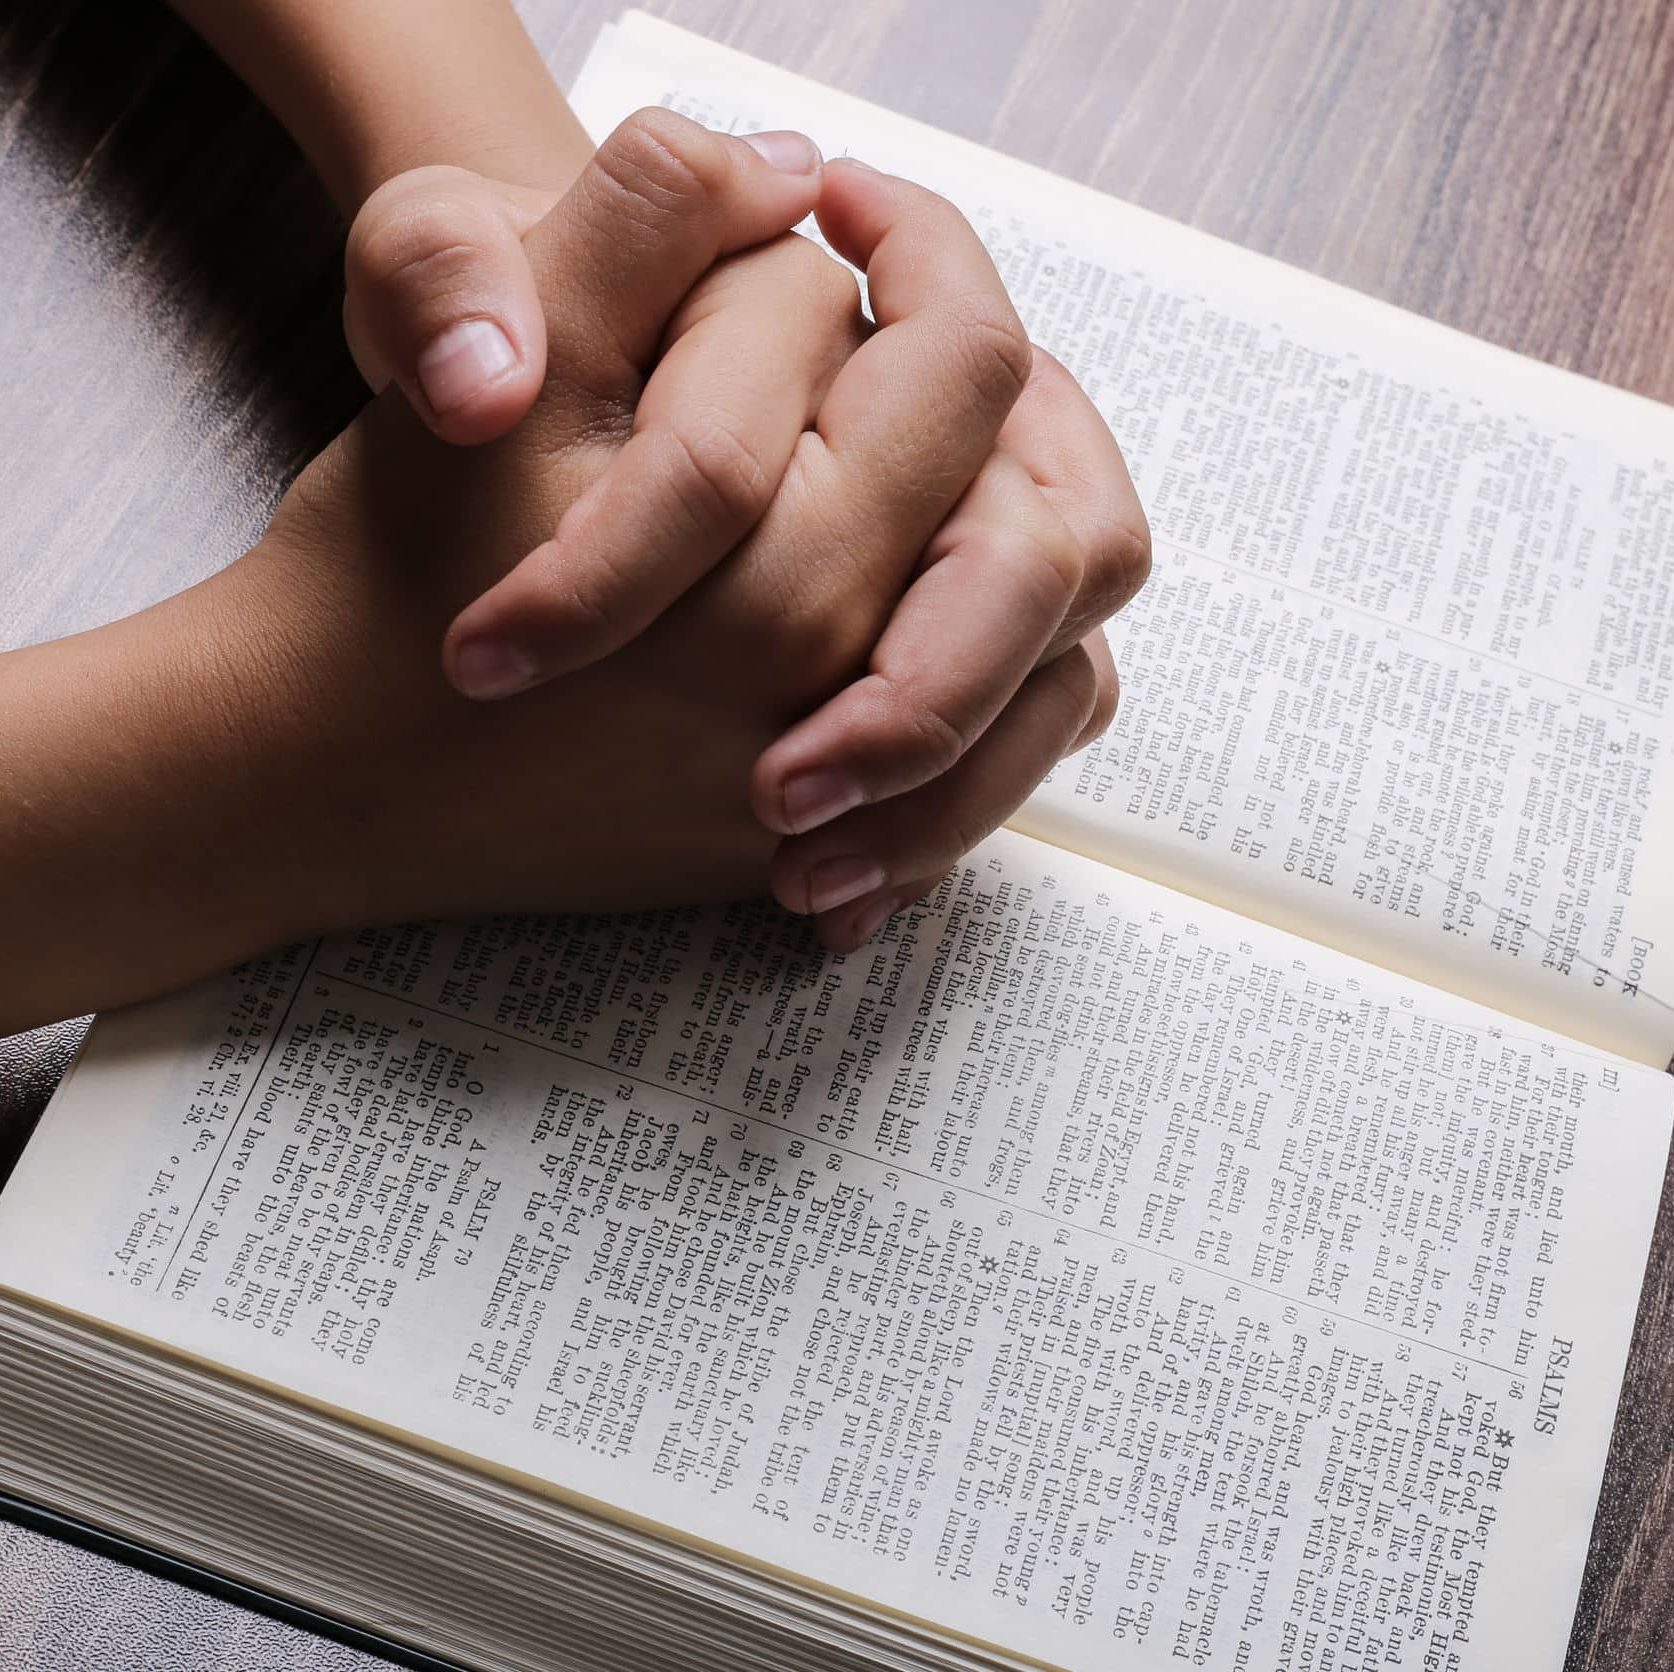 Praying hands with opened holy bible on the wooden desk.